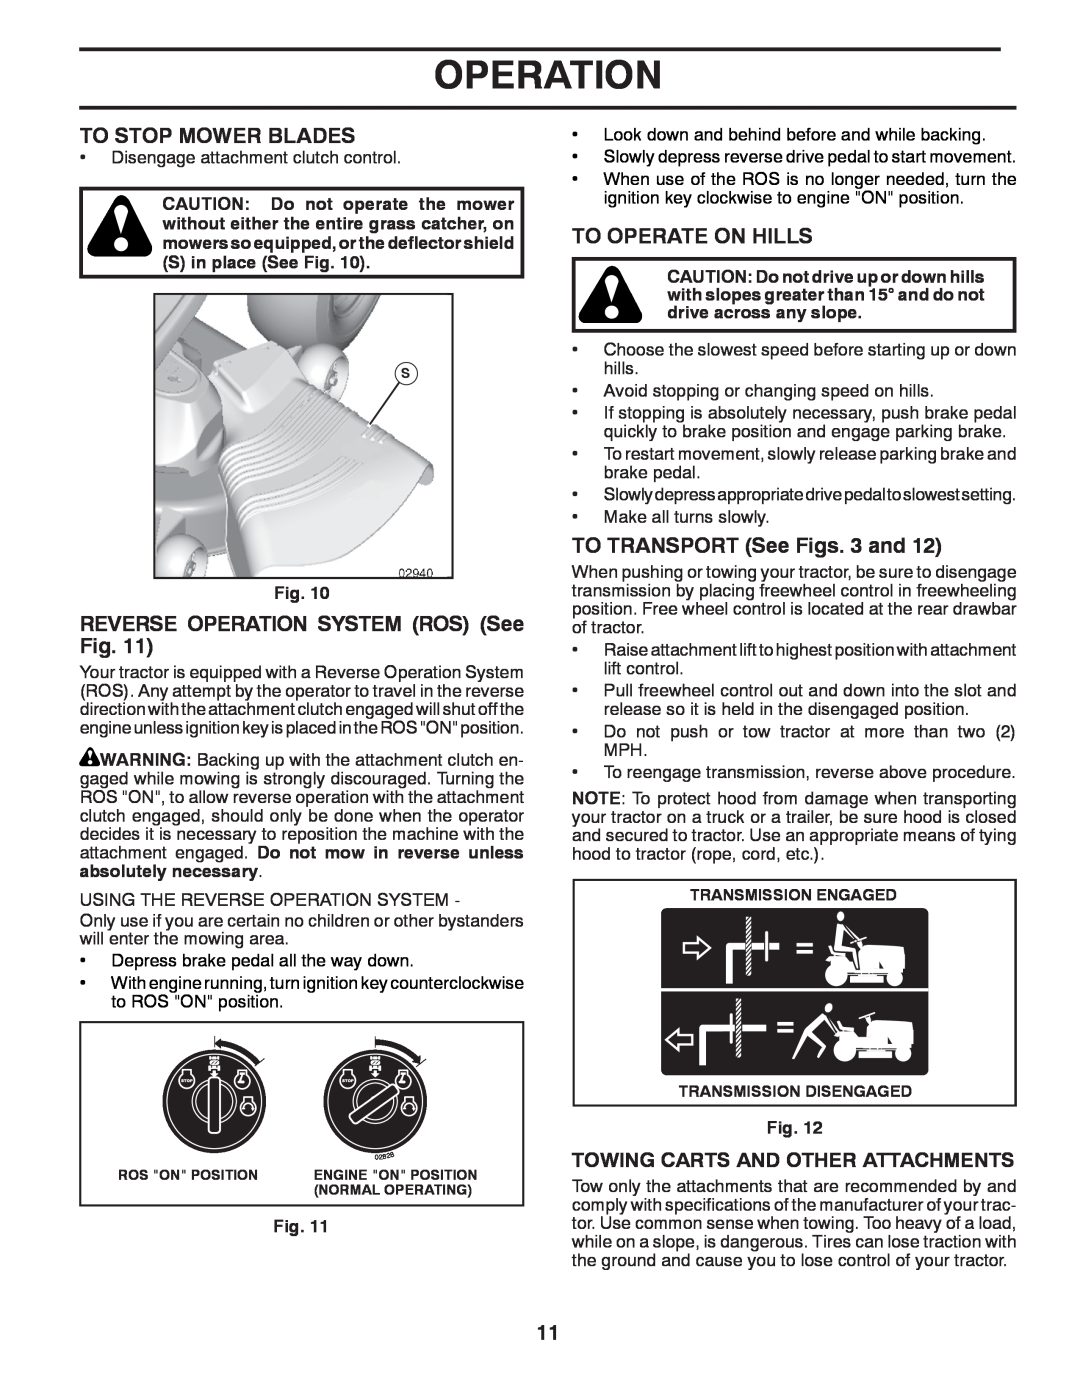 Poulan 96042012500 manual To Stop Mower Blades, REVERSE OPERATION SYSTEM ROS See Fig, To Operate On Hills, Operation 